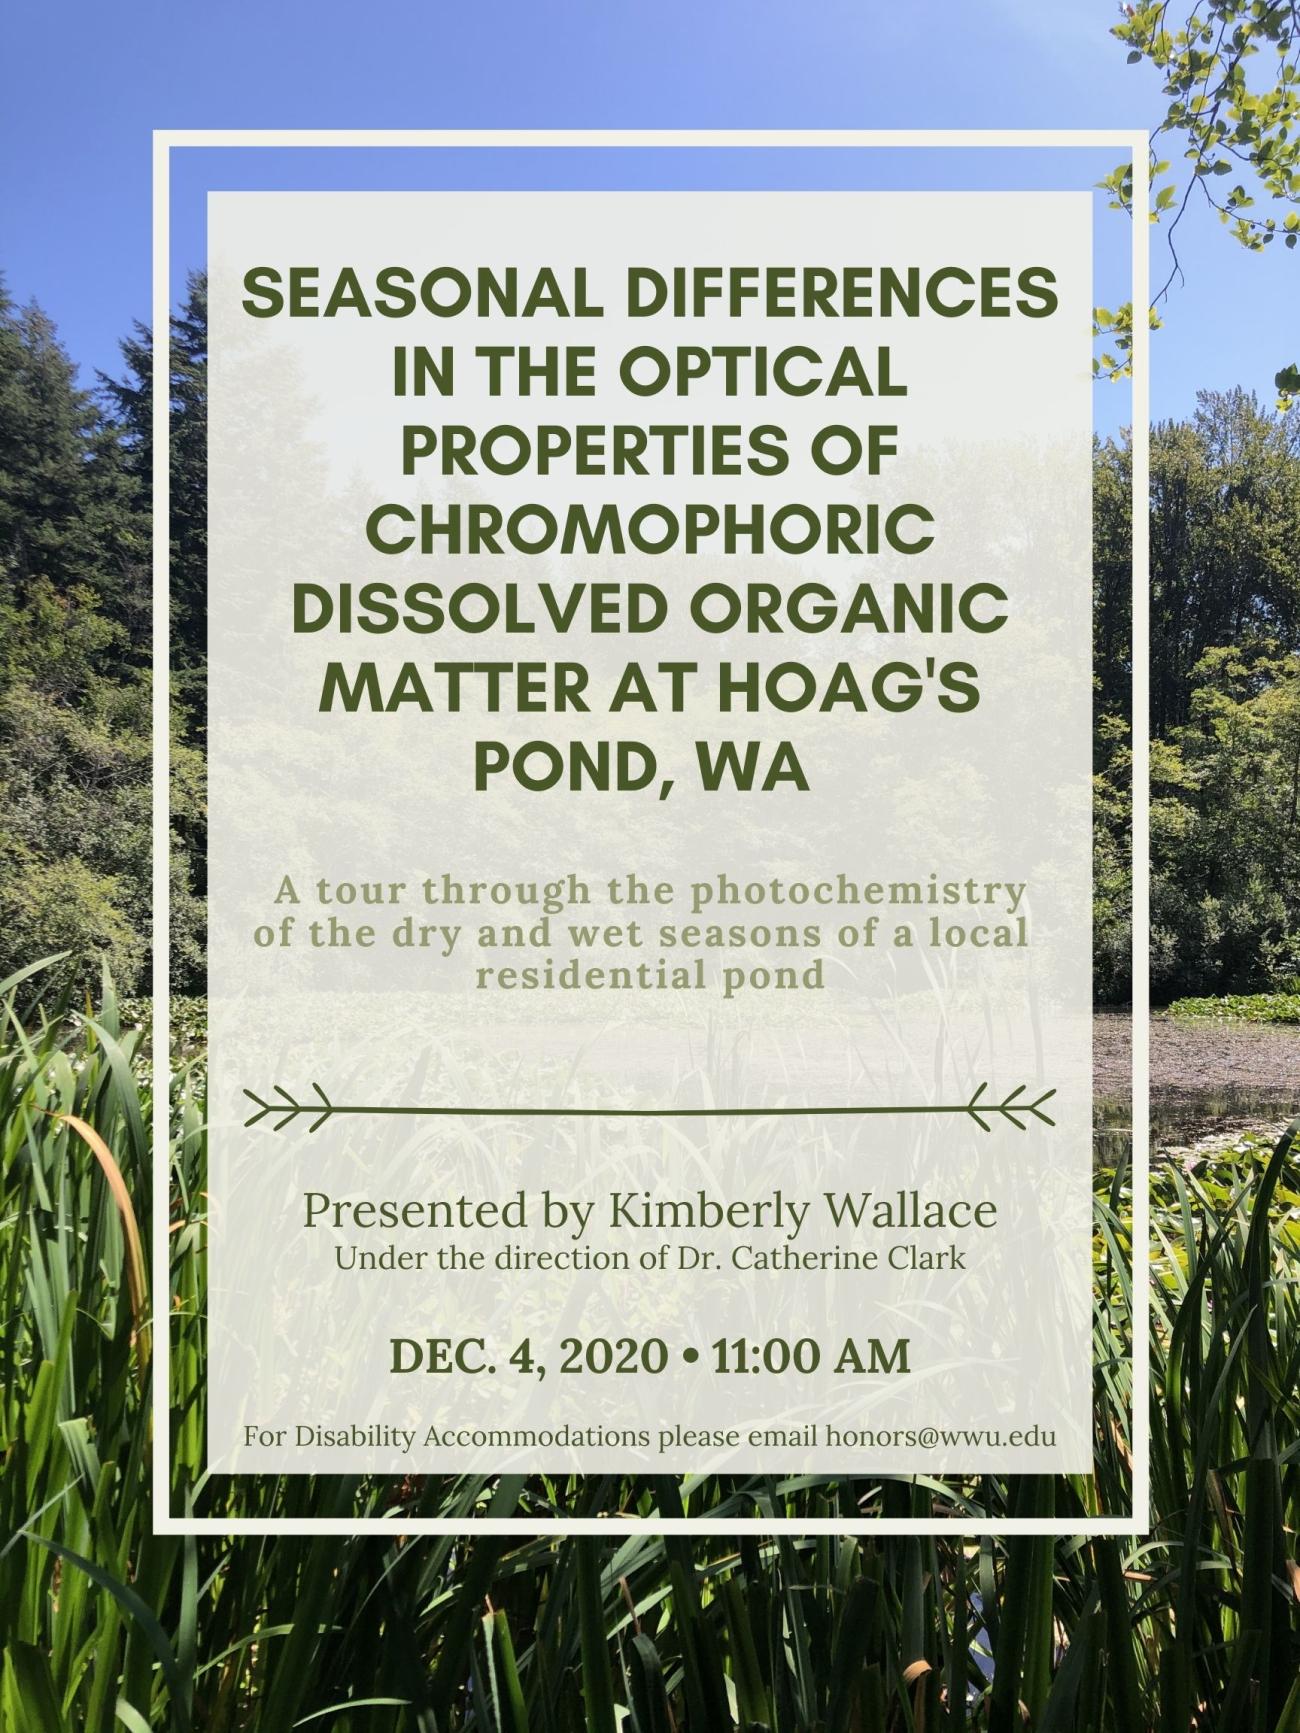 Image: A sunny day at Hoag's Pond, Bellingham. There're cattails in the foreground, pond in the background, trees in the distance, and a clear blue sky. Text: "Seasonal Differences in the Optical Properties of Chromophoric Dissolved Organic Matter at Hoag's Pond, WA. A tour through the photochemistry of the dry and wet seasons of a local residential pond. Presented by Kimberly Wallace. Under the direction of Dr. Catherine Clark. Dec. 4, 2020. 11 AM. For disability accommodations please email honors@wwu.edu"